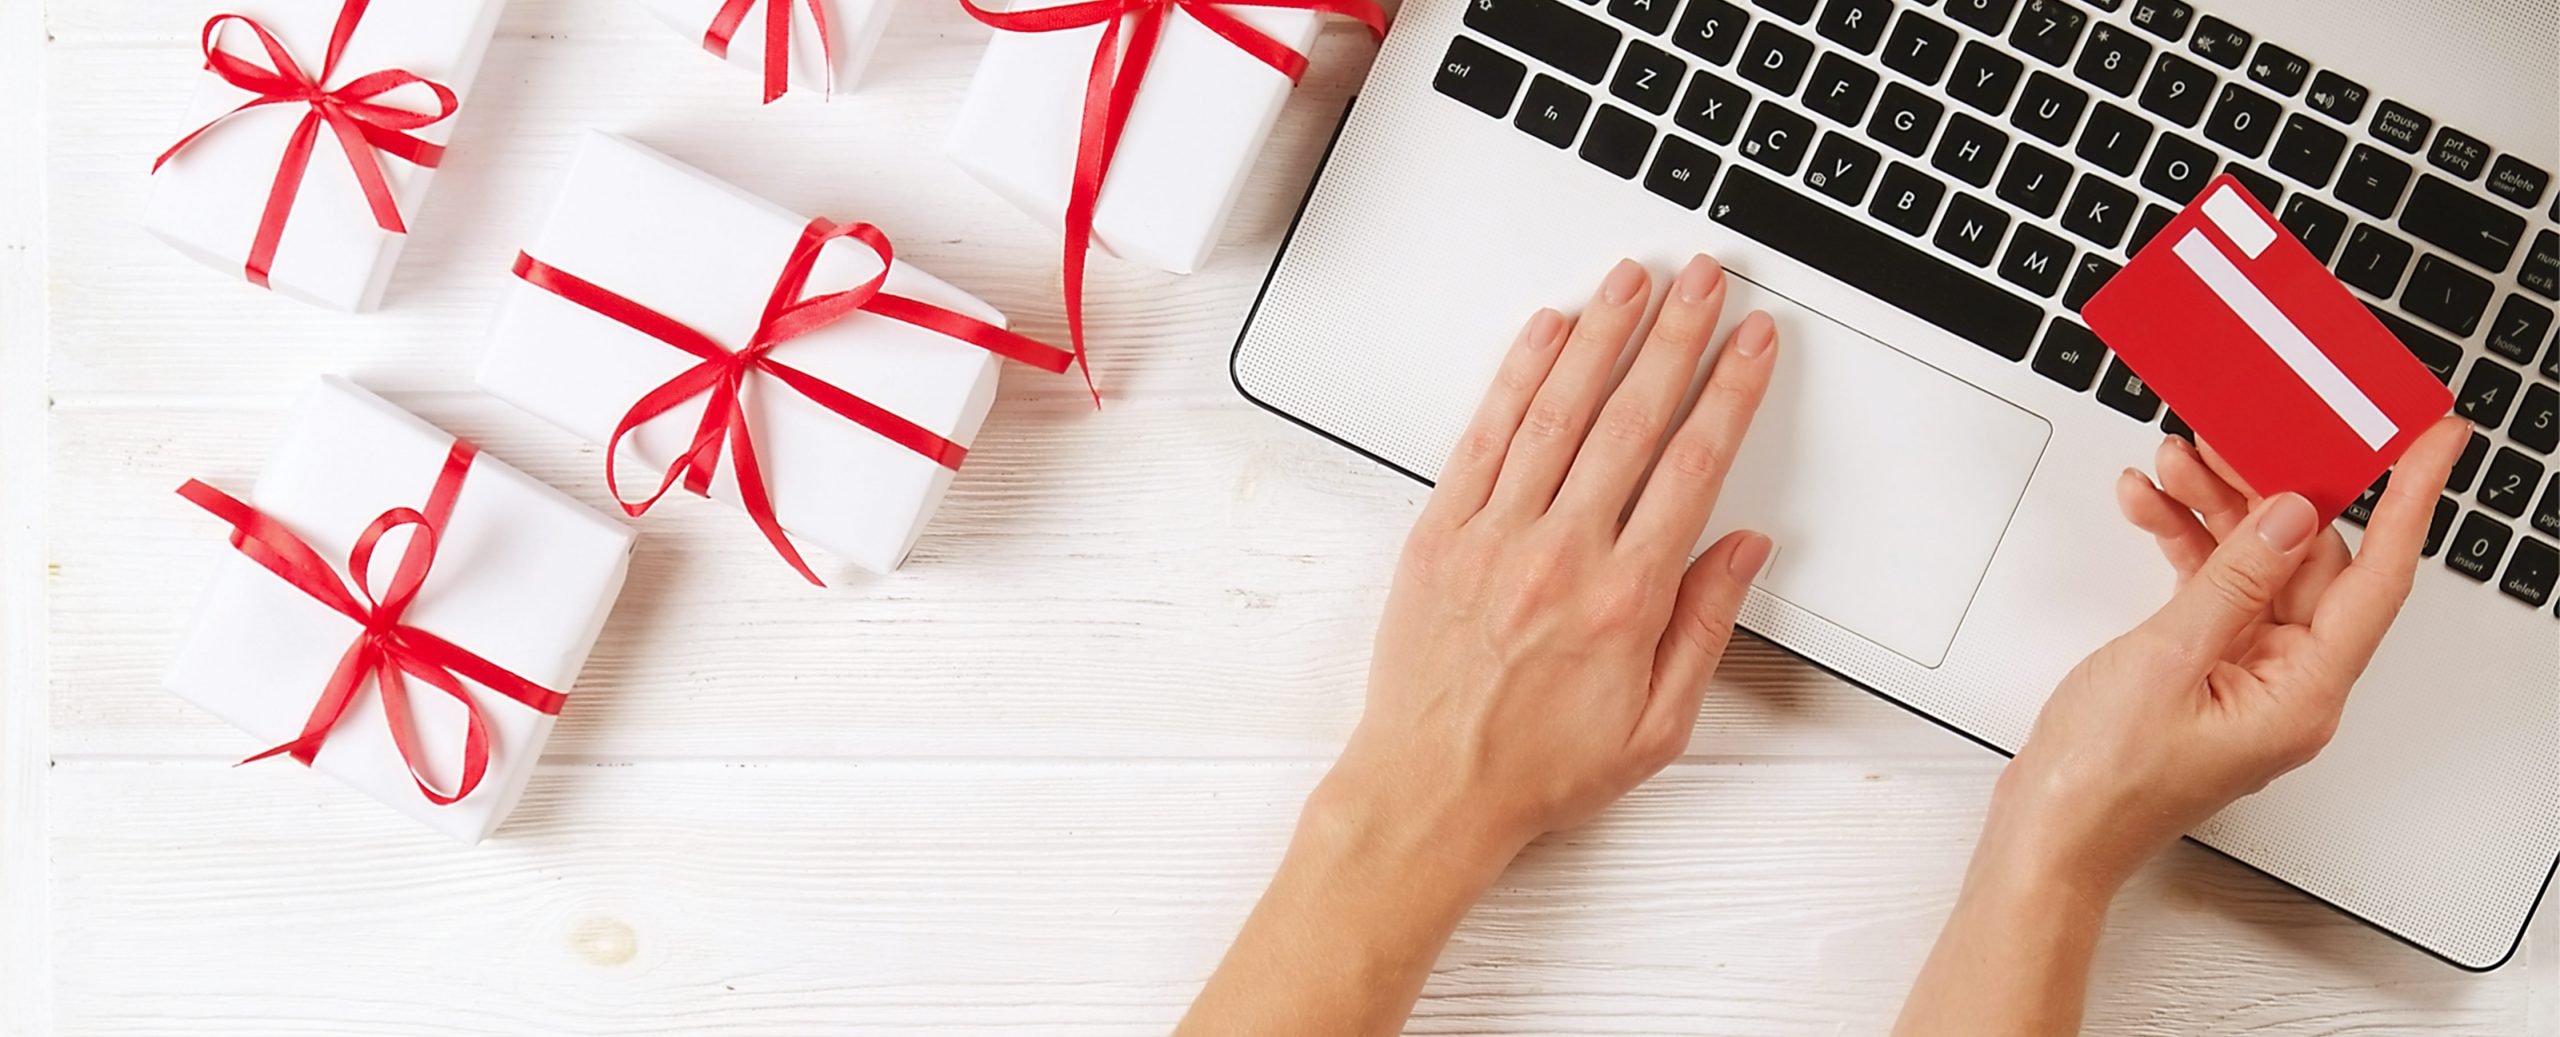 Virtual Gift Ideas to Make Your Next Event a Success